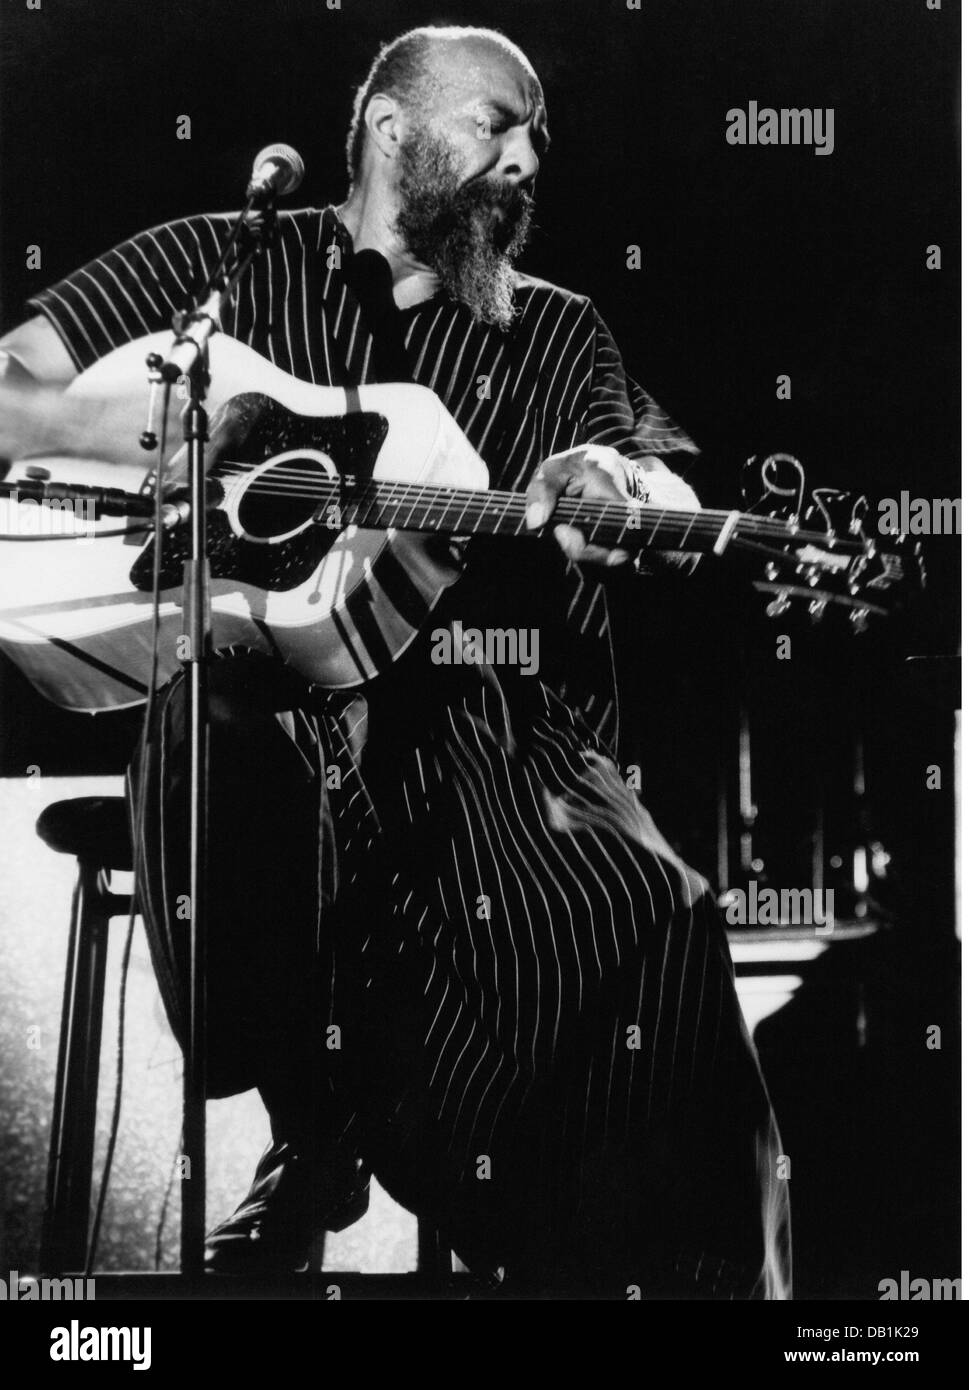 Havens, Richie, 21.1.1941 - 22.4.2013, American musician (folk music), singer, half length, during stage performance, Montreux, 1996, Stock Photo